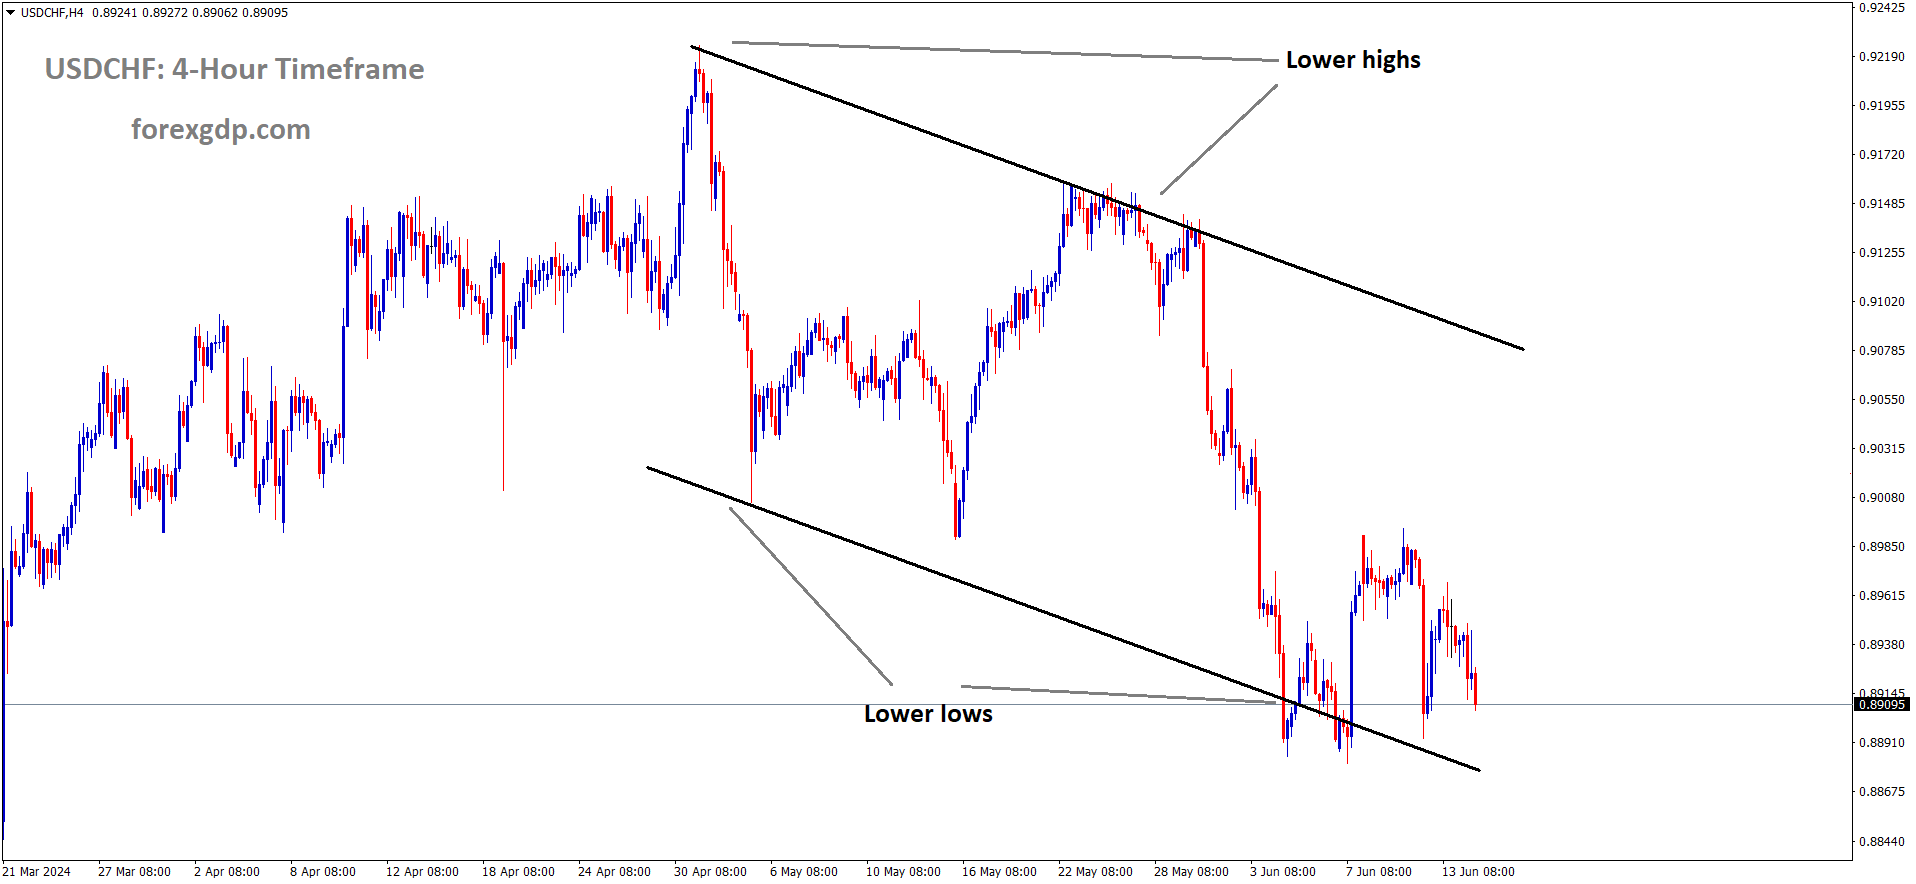 USDCHF is moving in Descending channel and market has reached lower low area of the channel